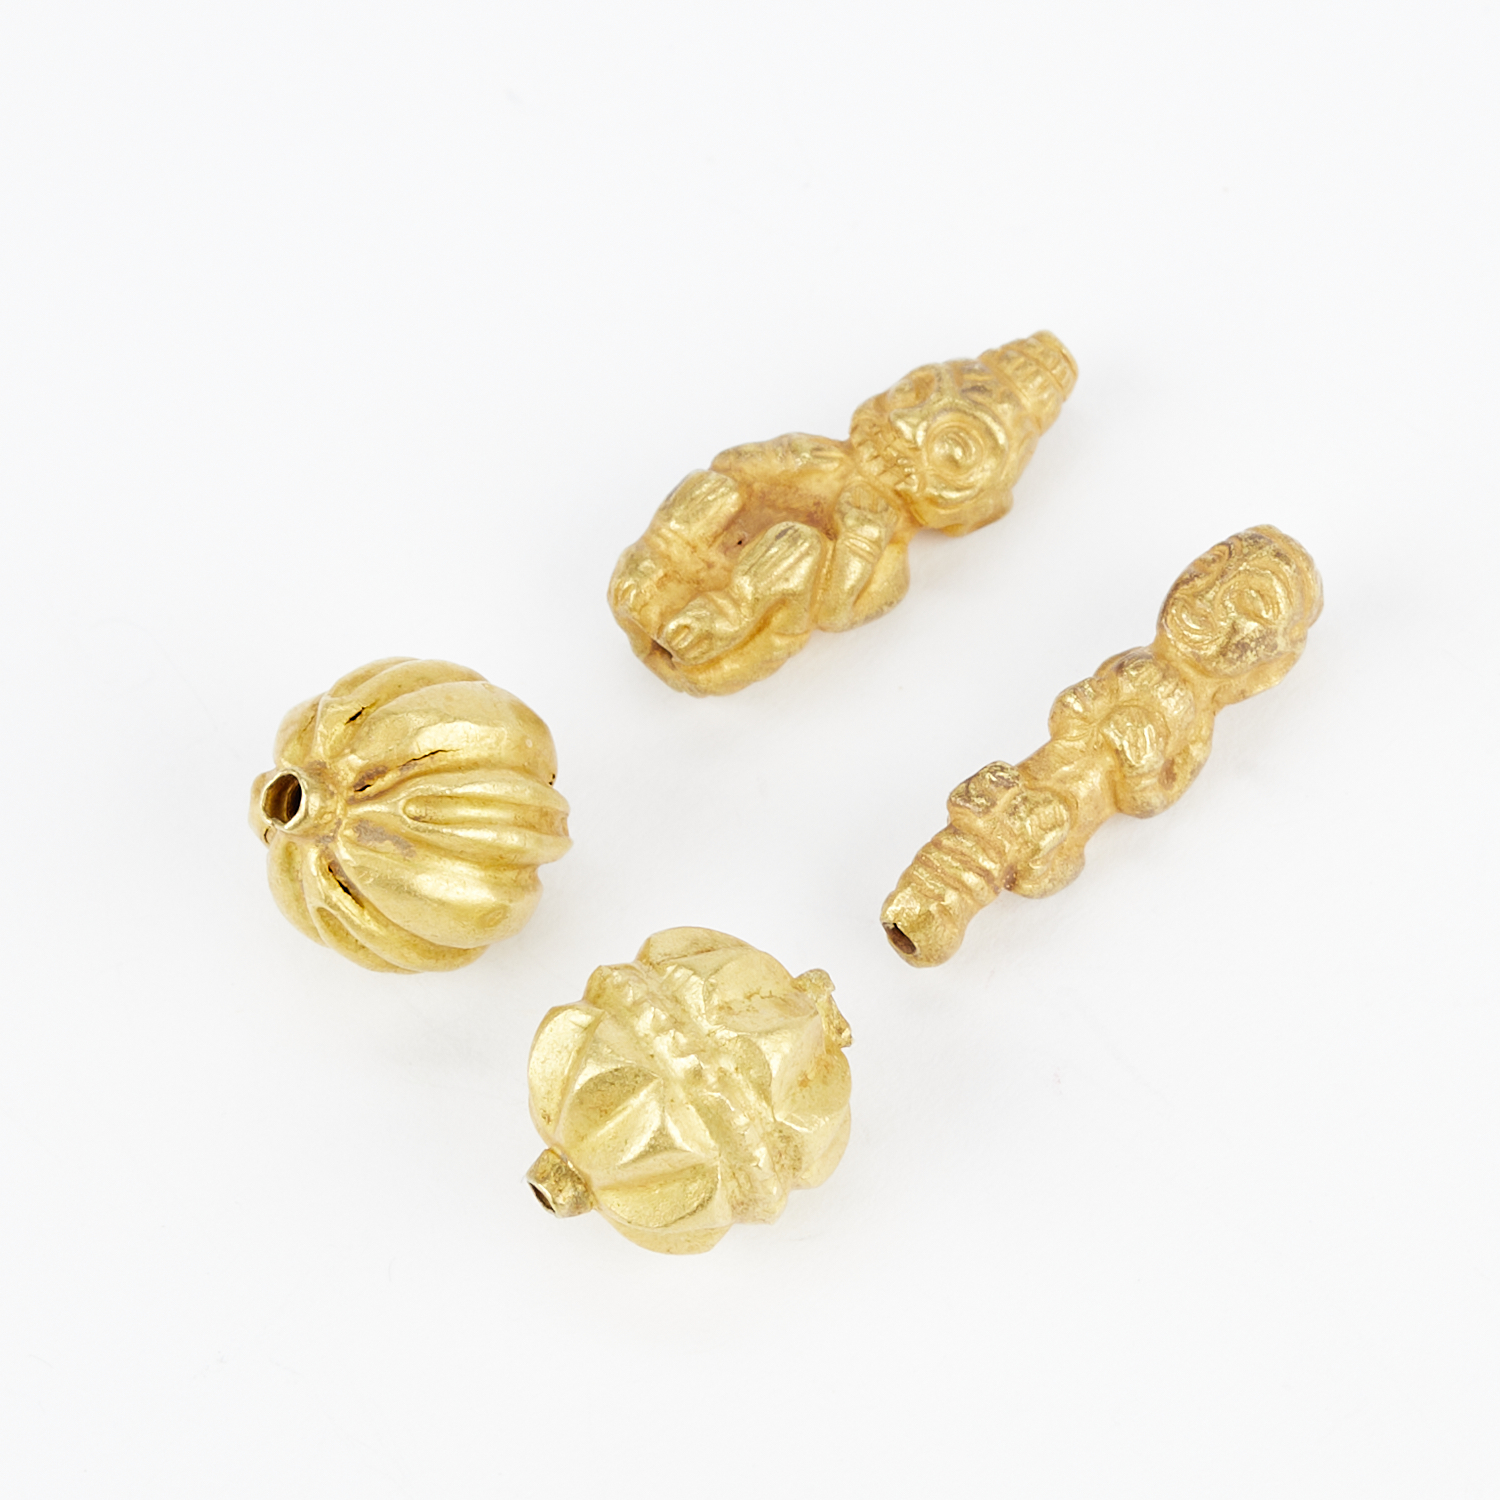 4 Southeast Asian Silk Road Gold Beads - Image 3 of 4